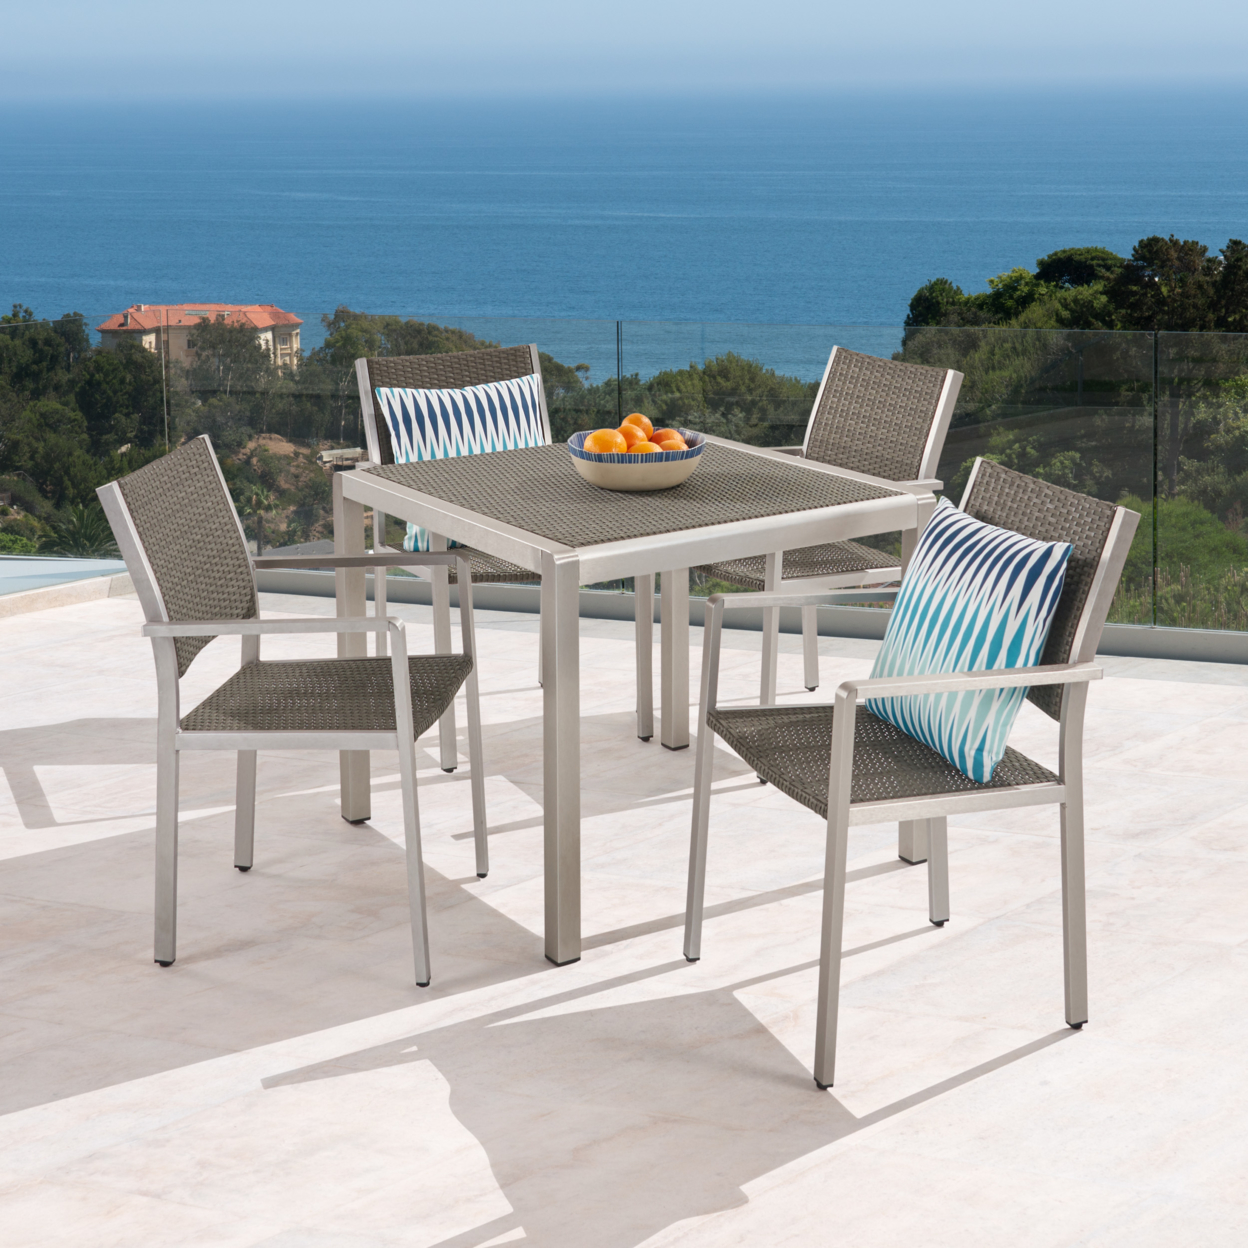 Julia Patio Dining Set - 4-Seater - Anodized Aluminum - Wicker Seats - Wicker Table Top